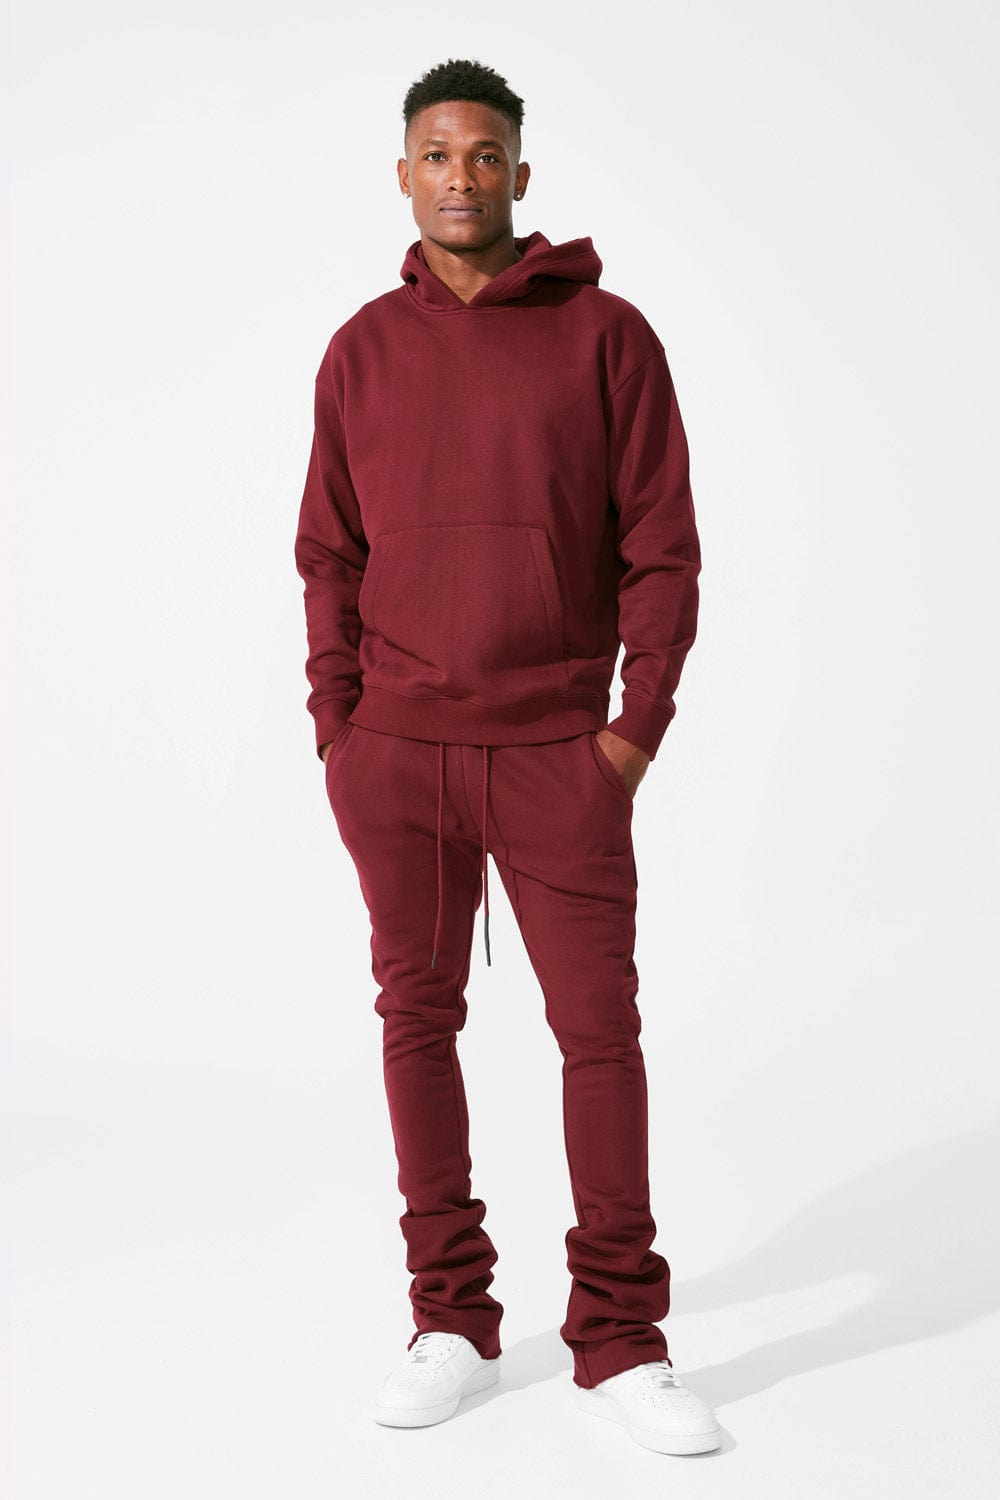 Armor Stacked Sweat Pants Red